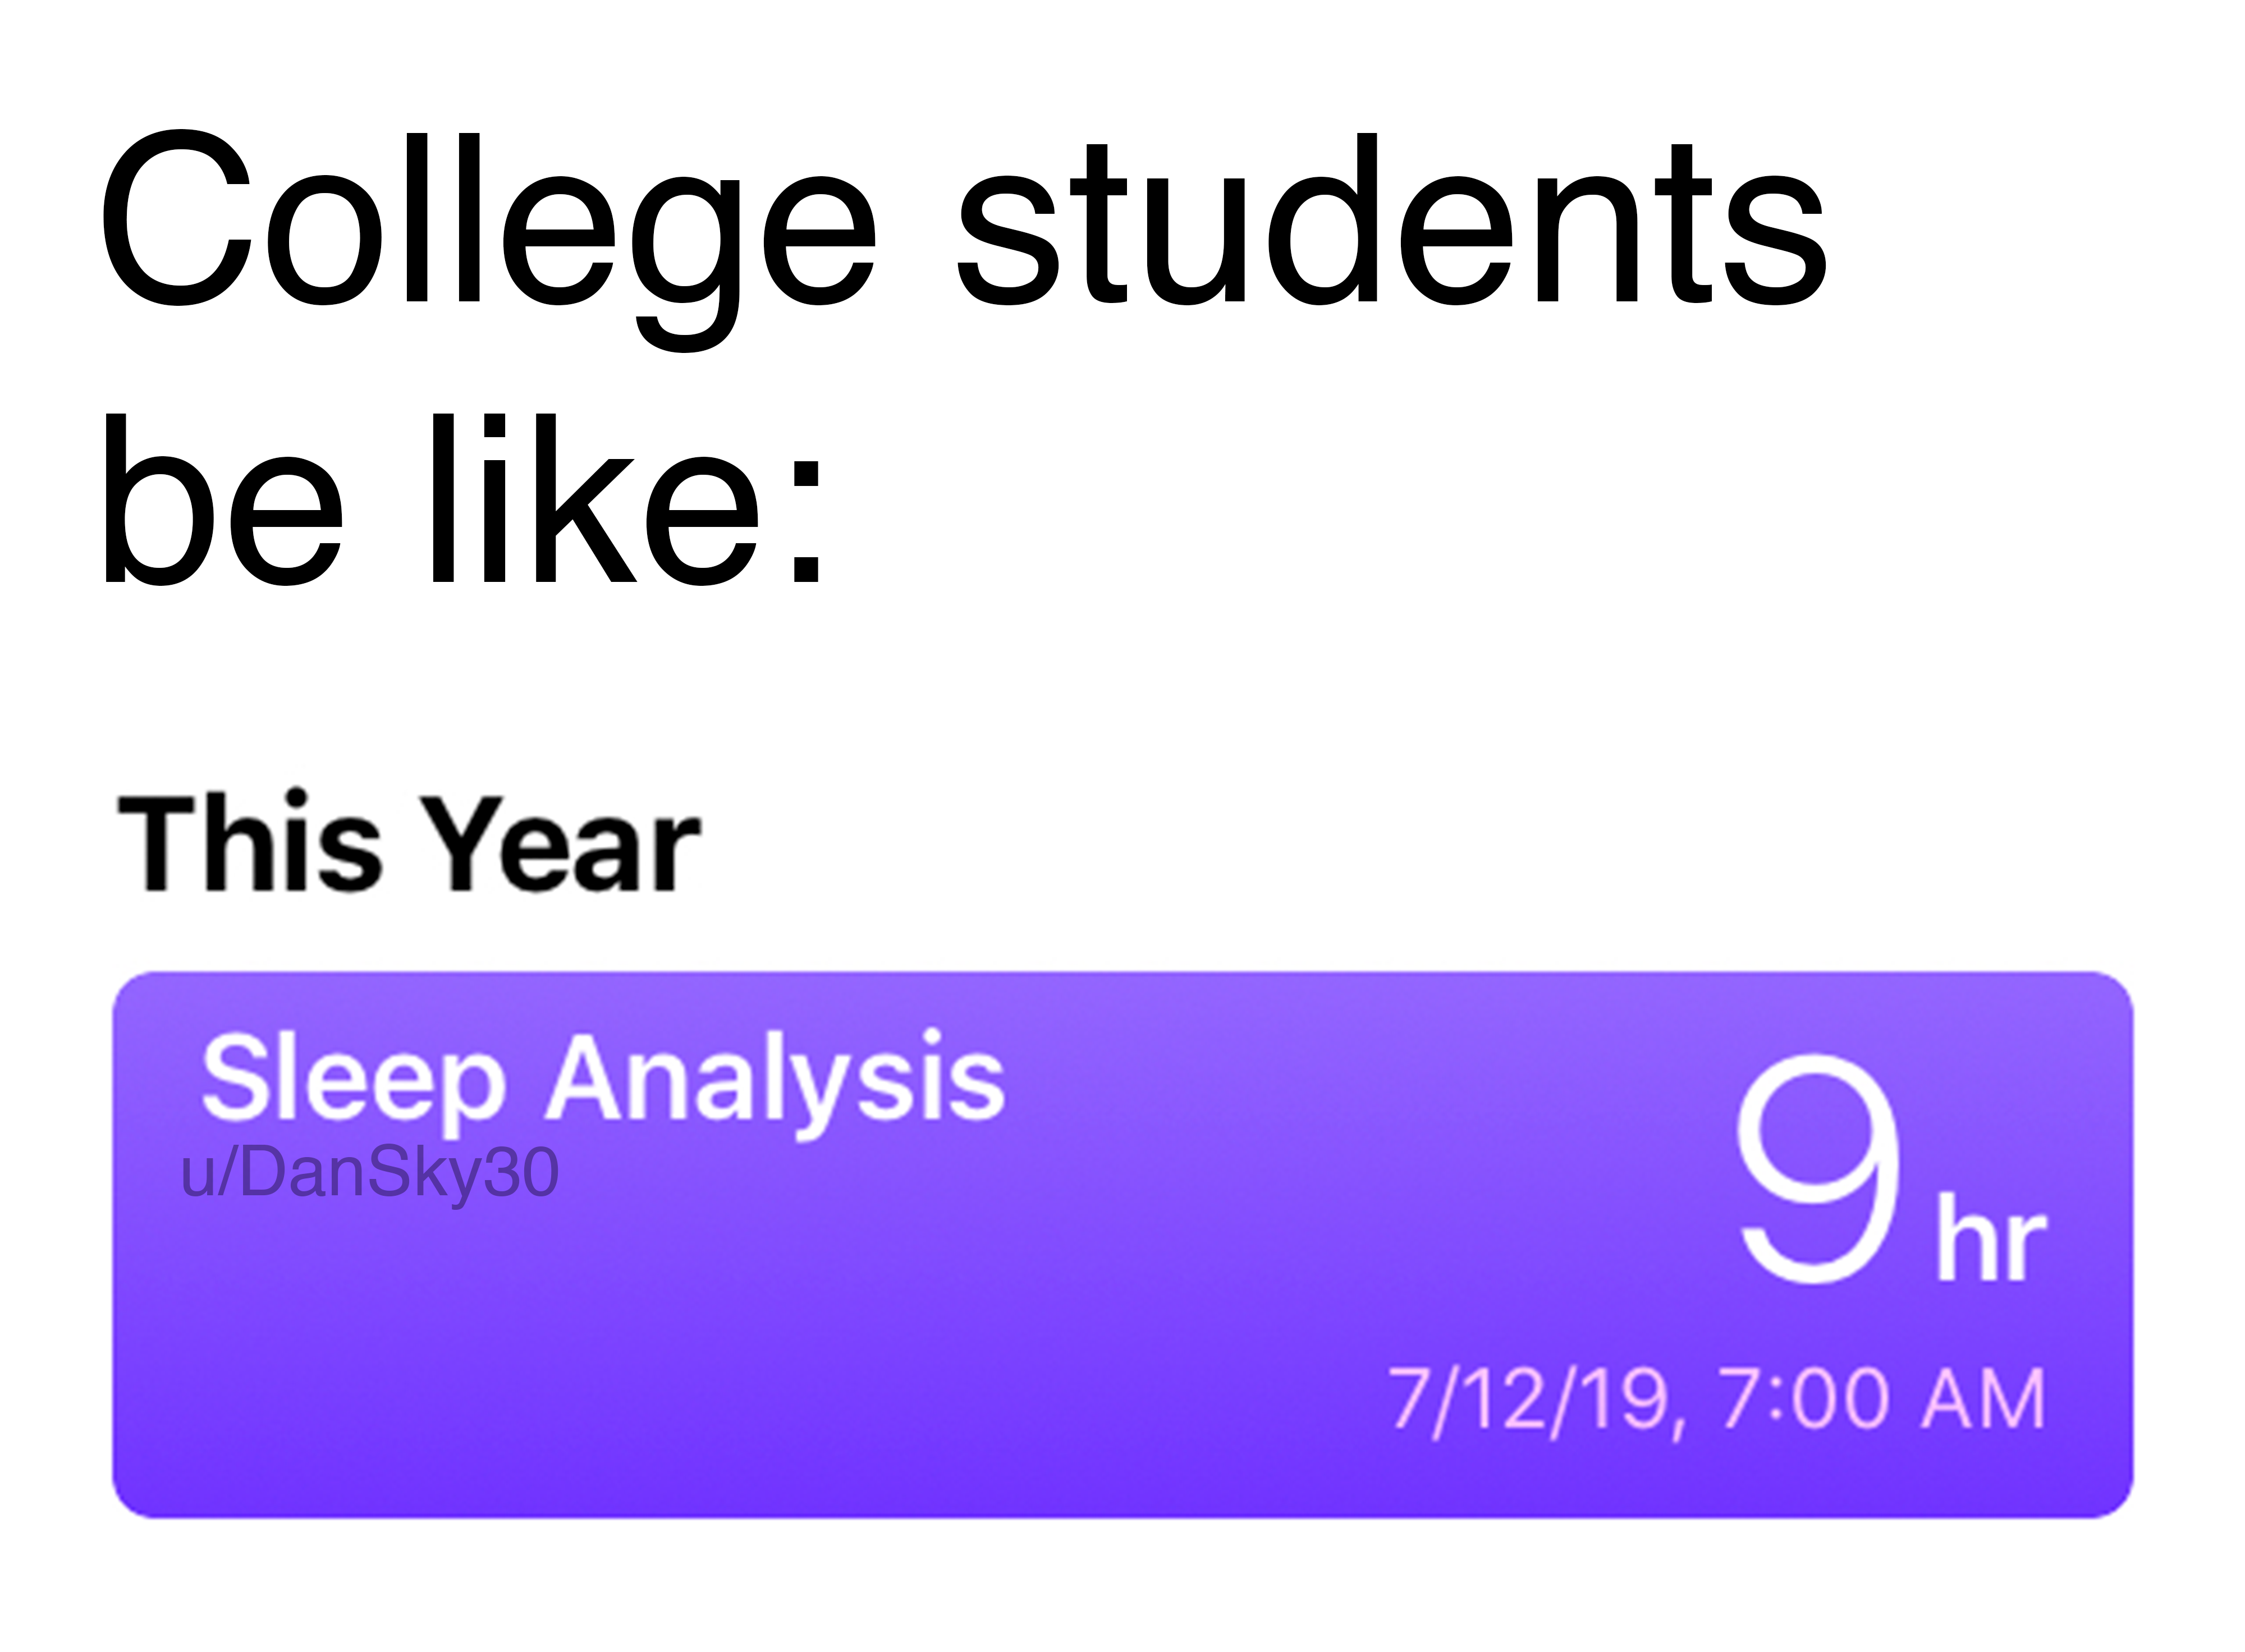 college dank memes - facebook like button - College students be This Year Sleep Analysis uDanSky30 9 hr 71219,